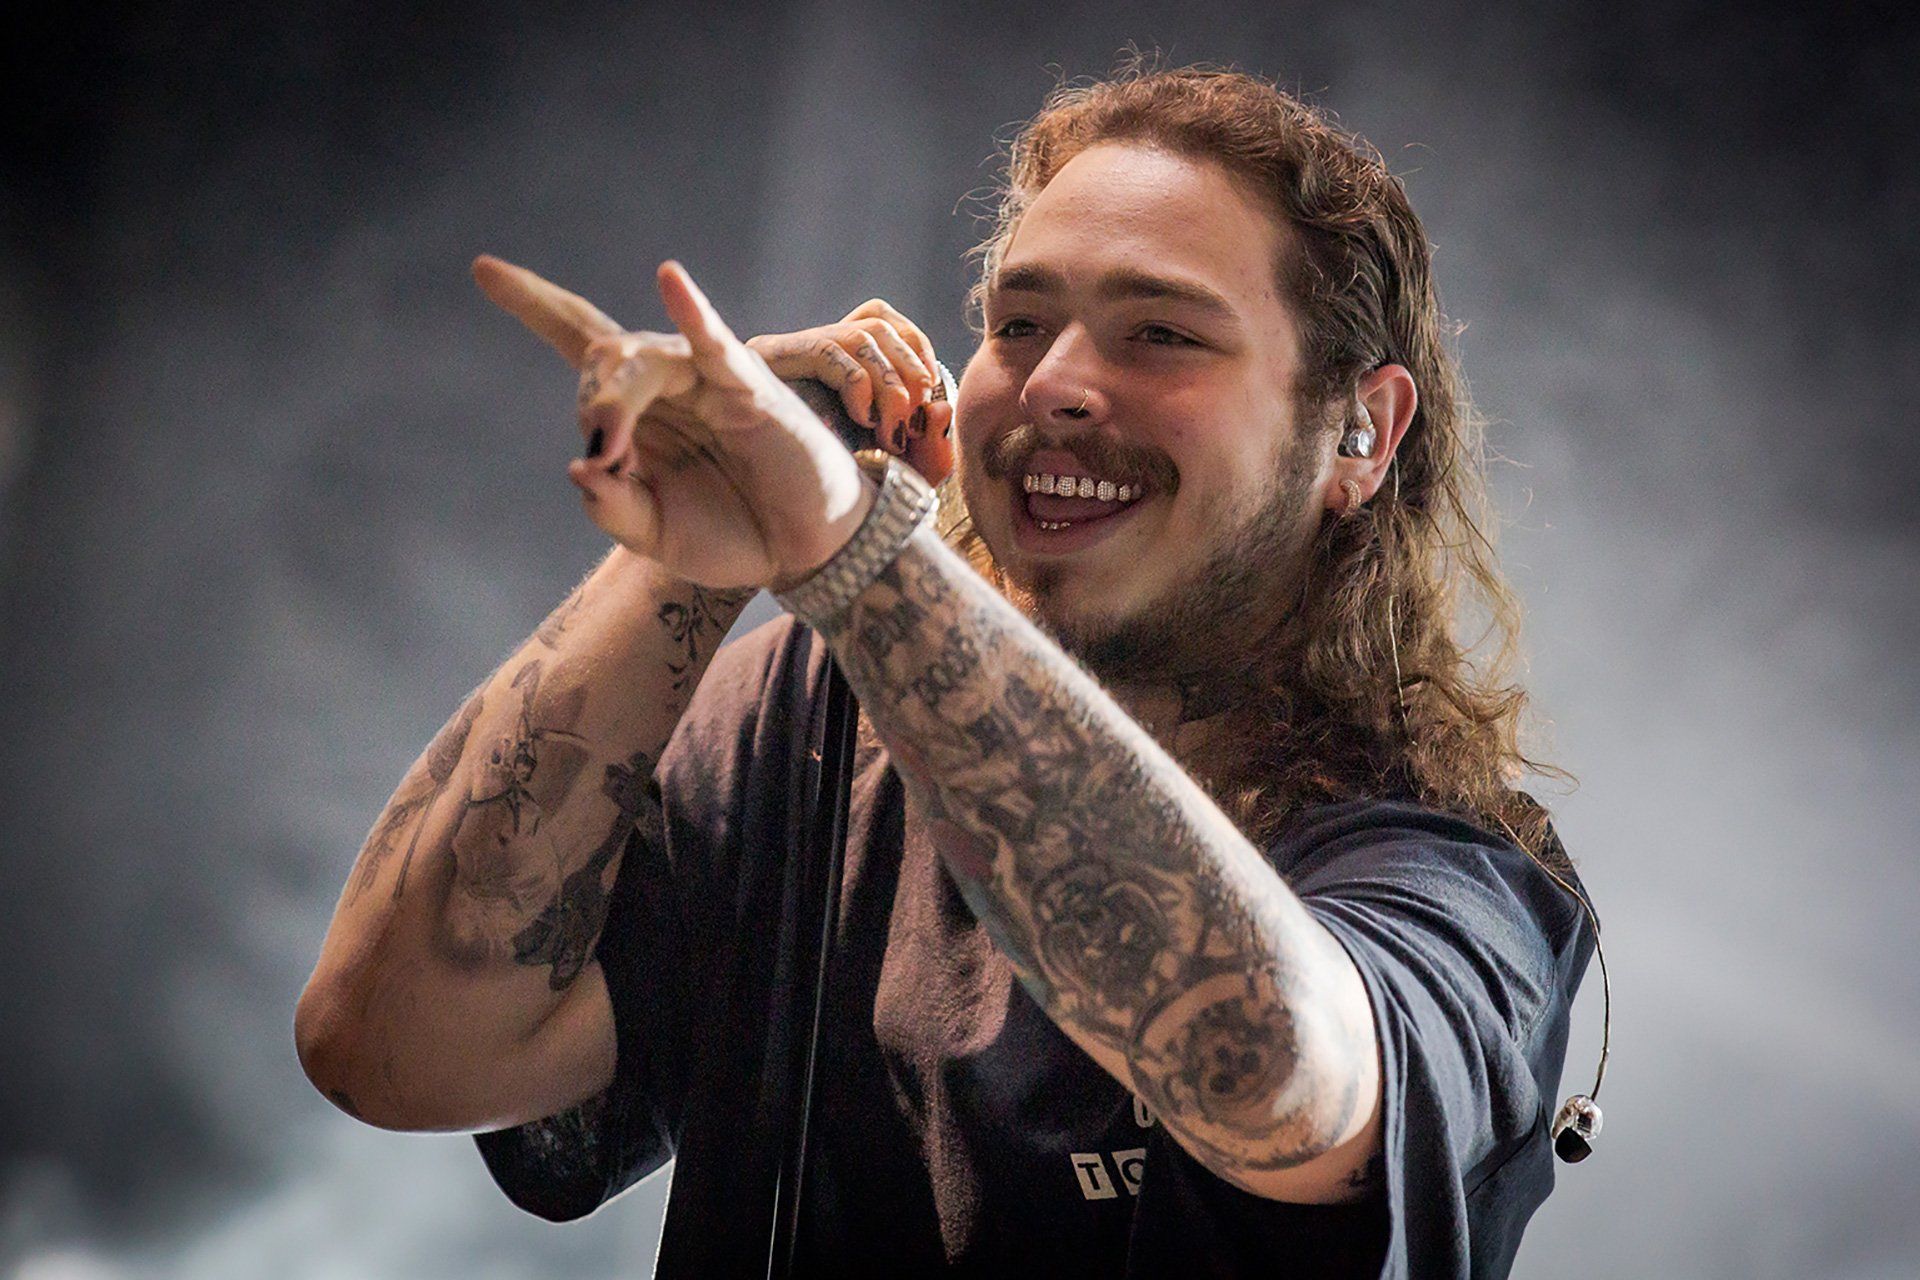 Post Malone On Stage Computer Wallpapers on WallpaperDog